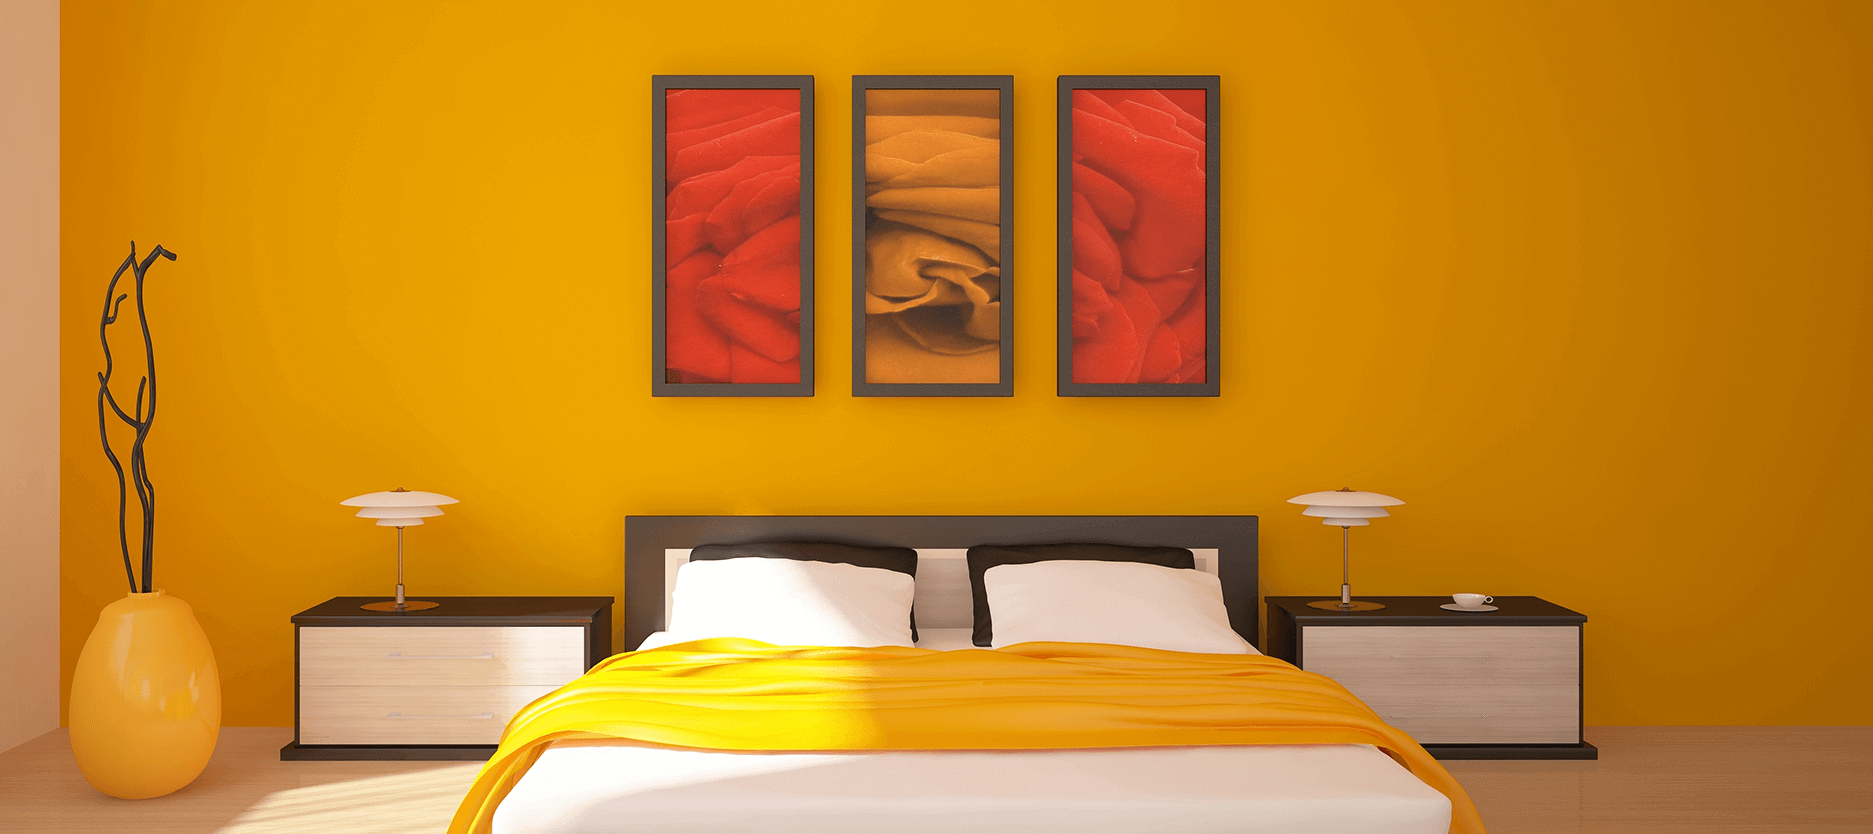 Bold Colours Break the Traditional Look